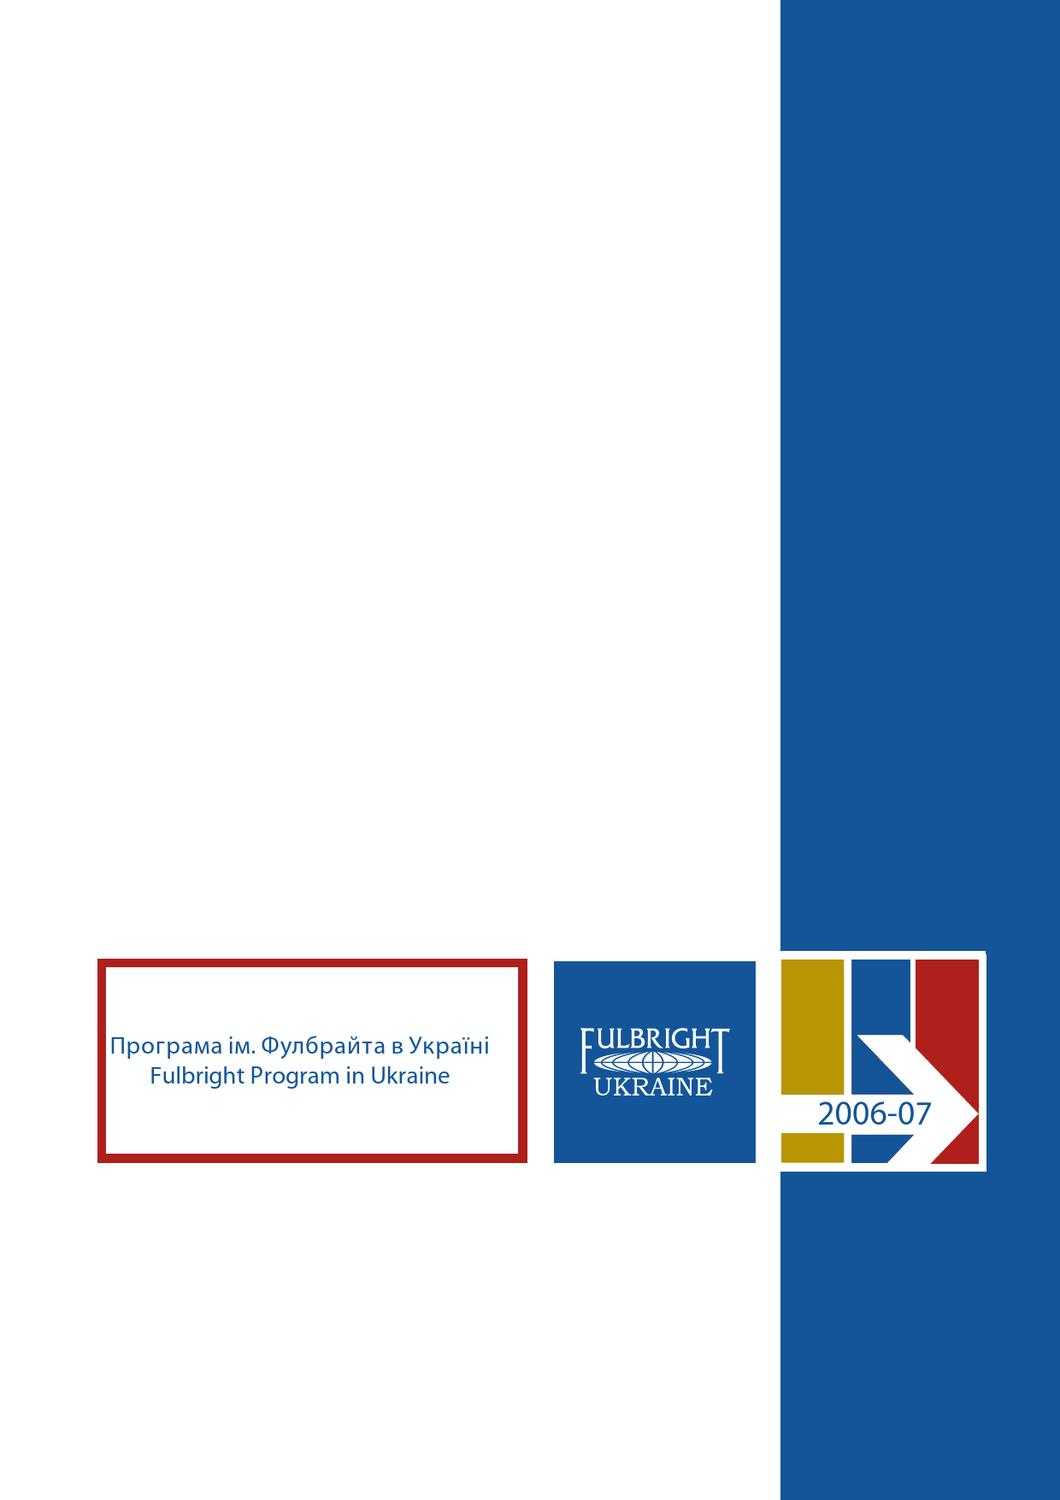 Fulbright Ukraine Yearbook 2006 2007The Fulbright In College Ruled Lined Paper Template Word 2007